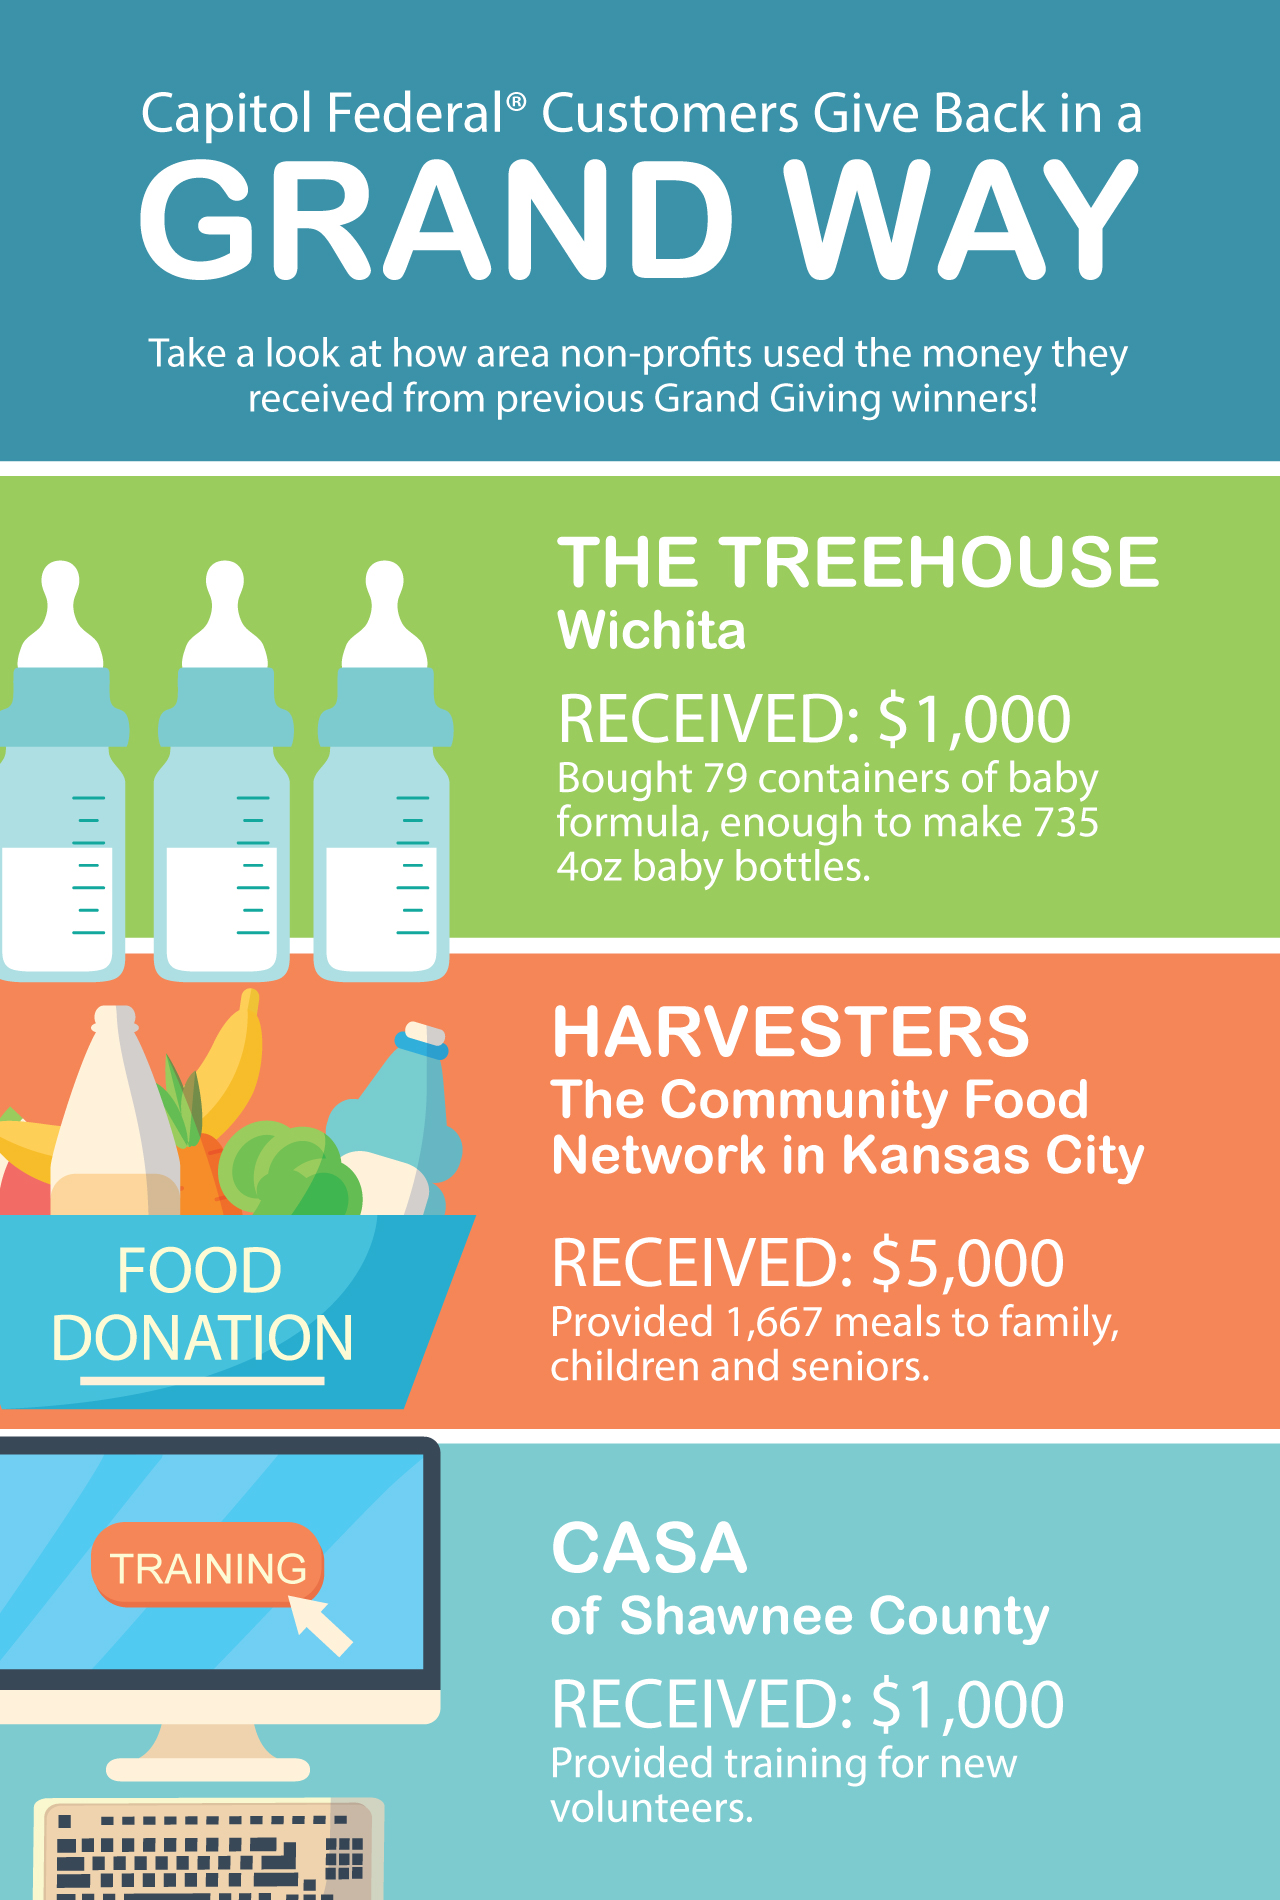 CapFed Customers Give Back Infographic